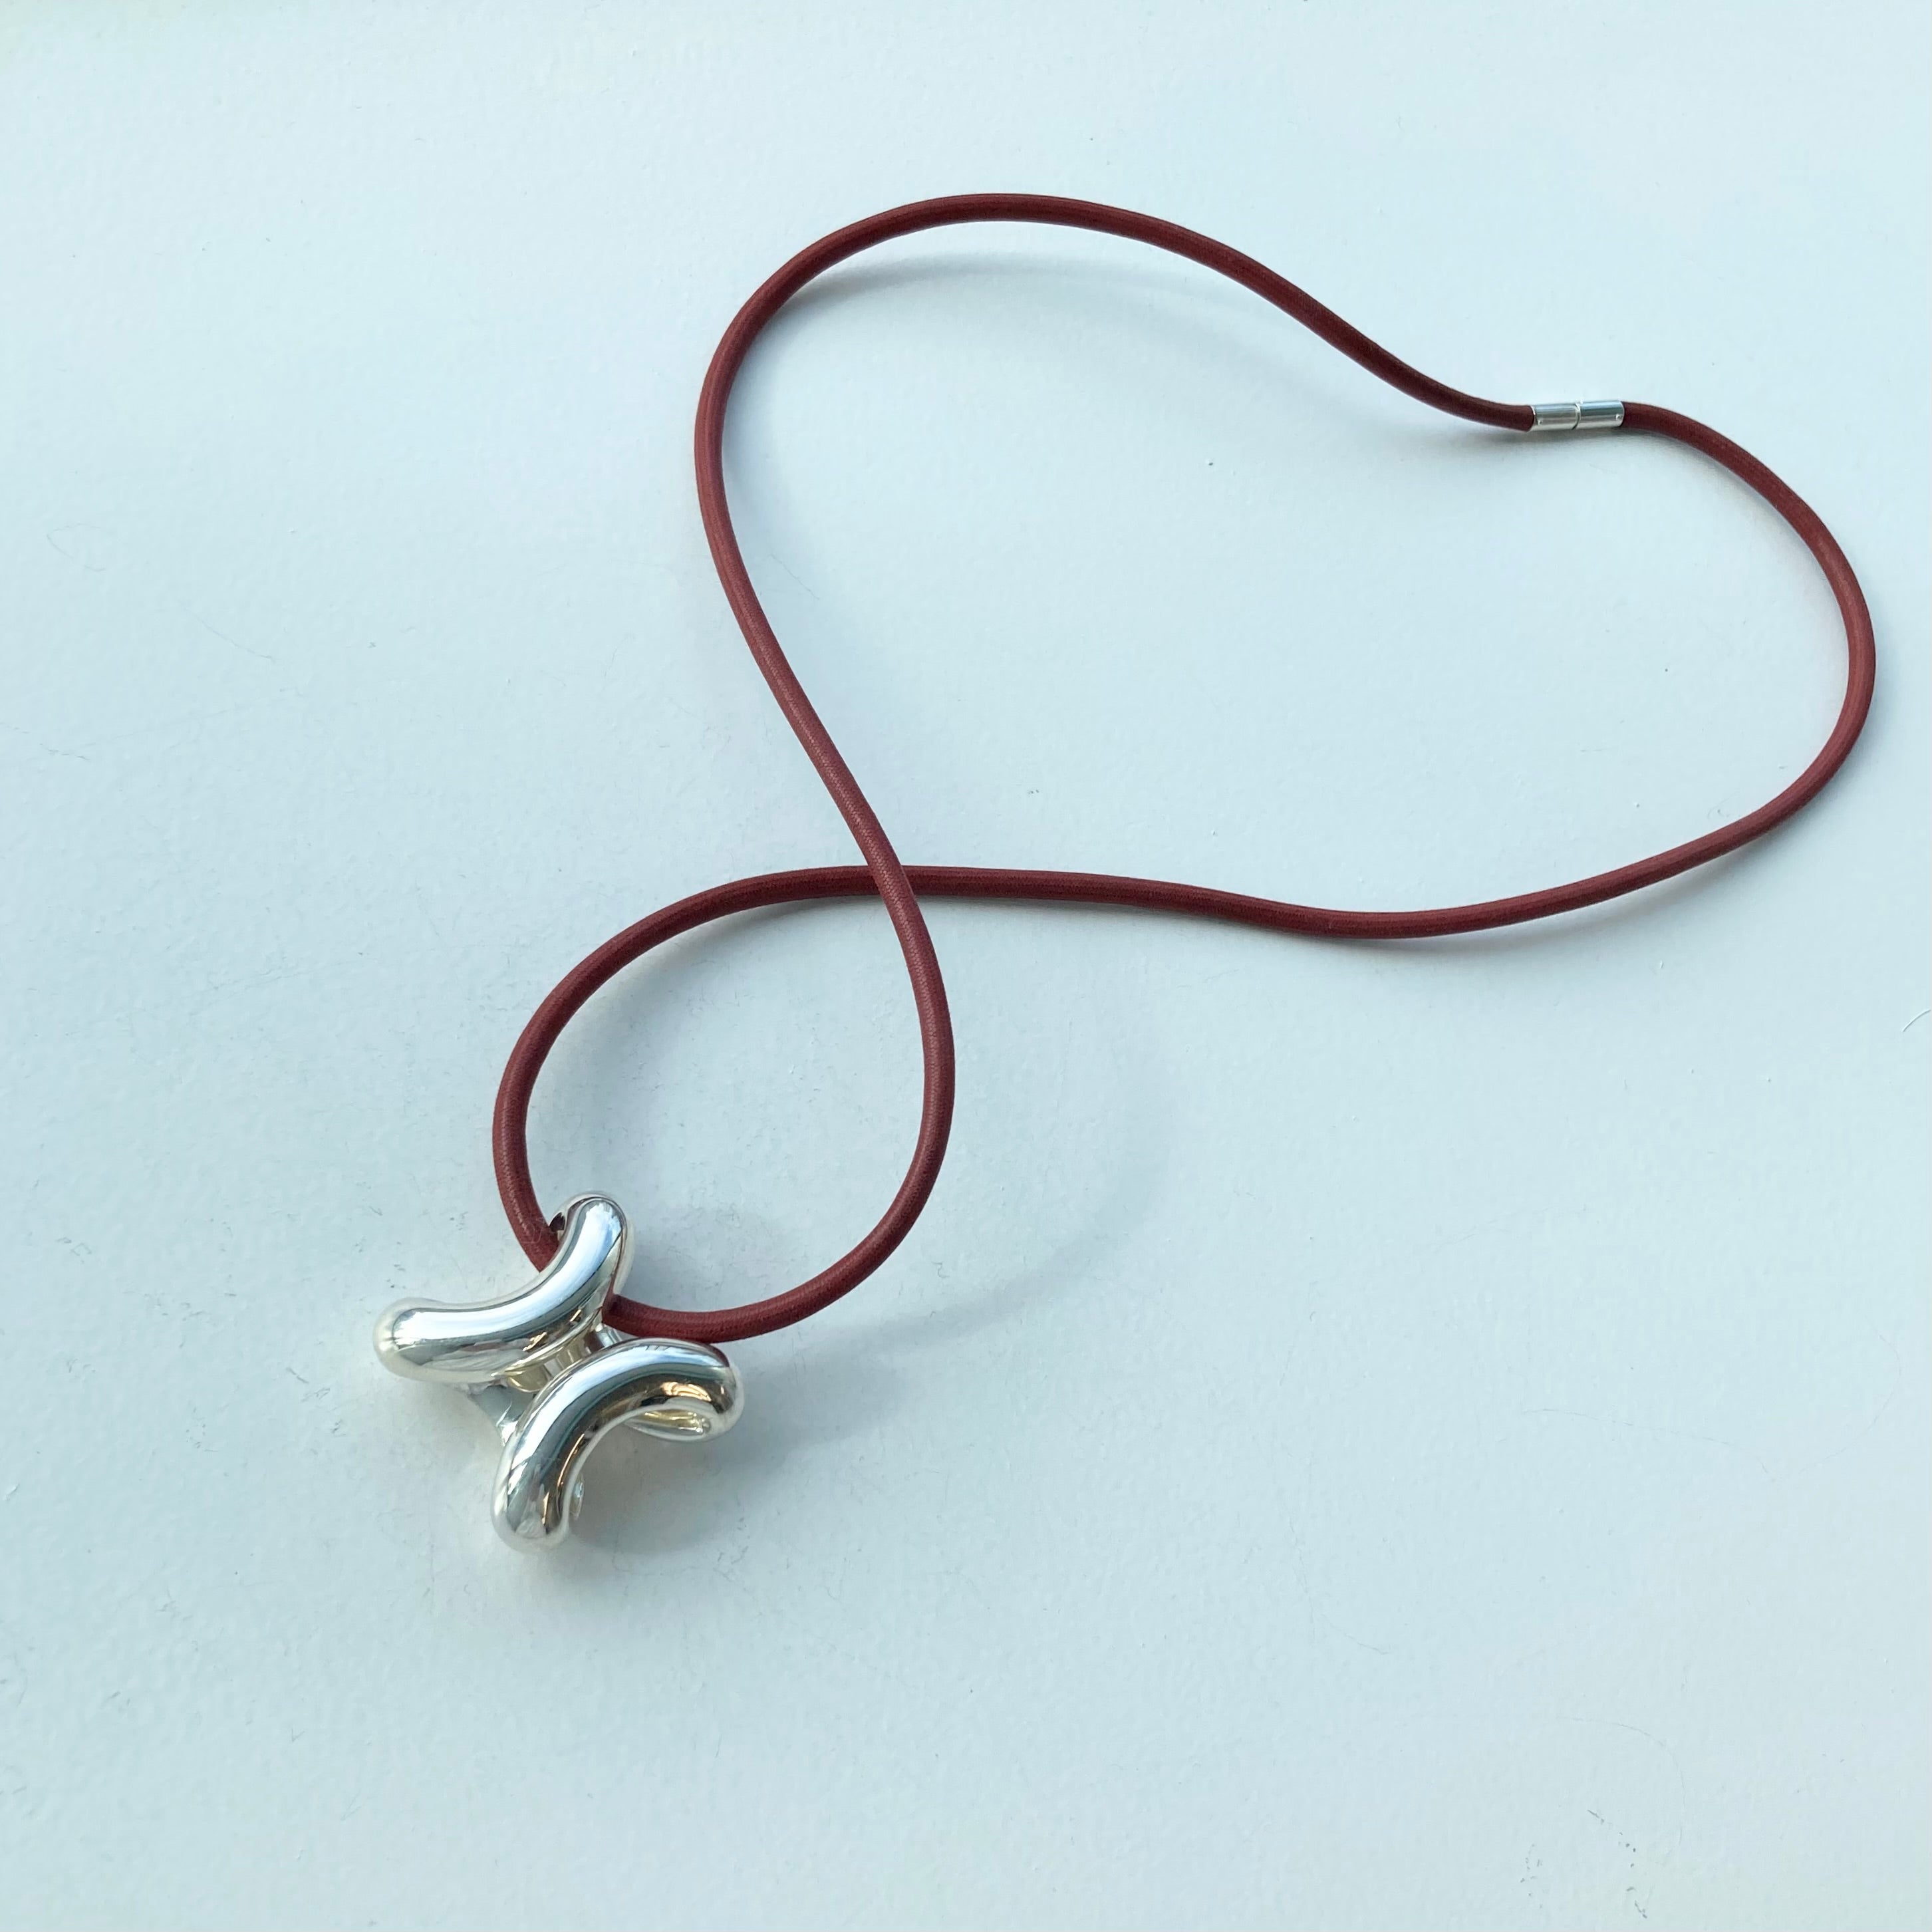 HERMES Lima necklace vintage SV925 エルメス リマ ネックレス ...